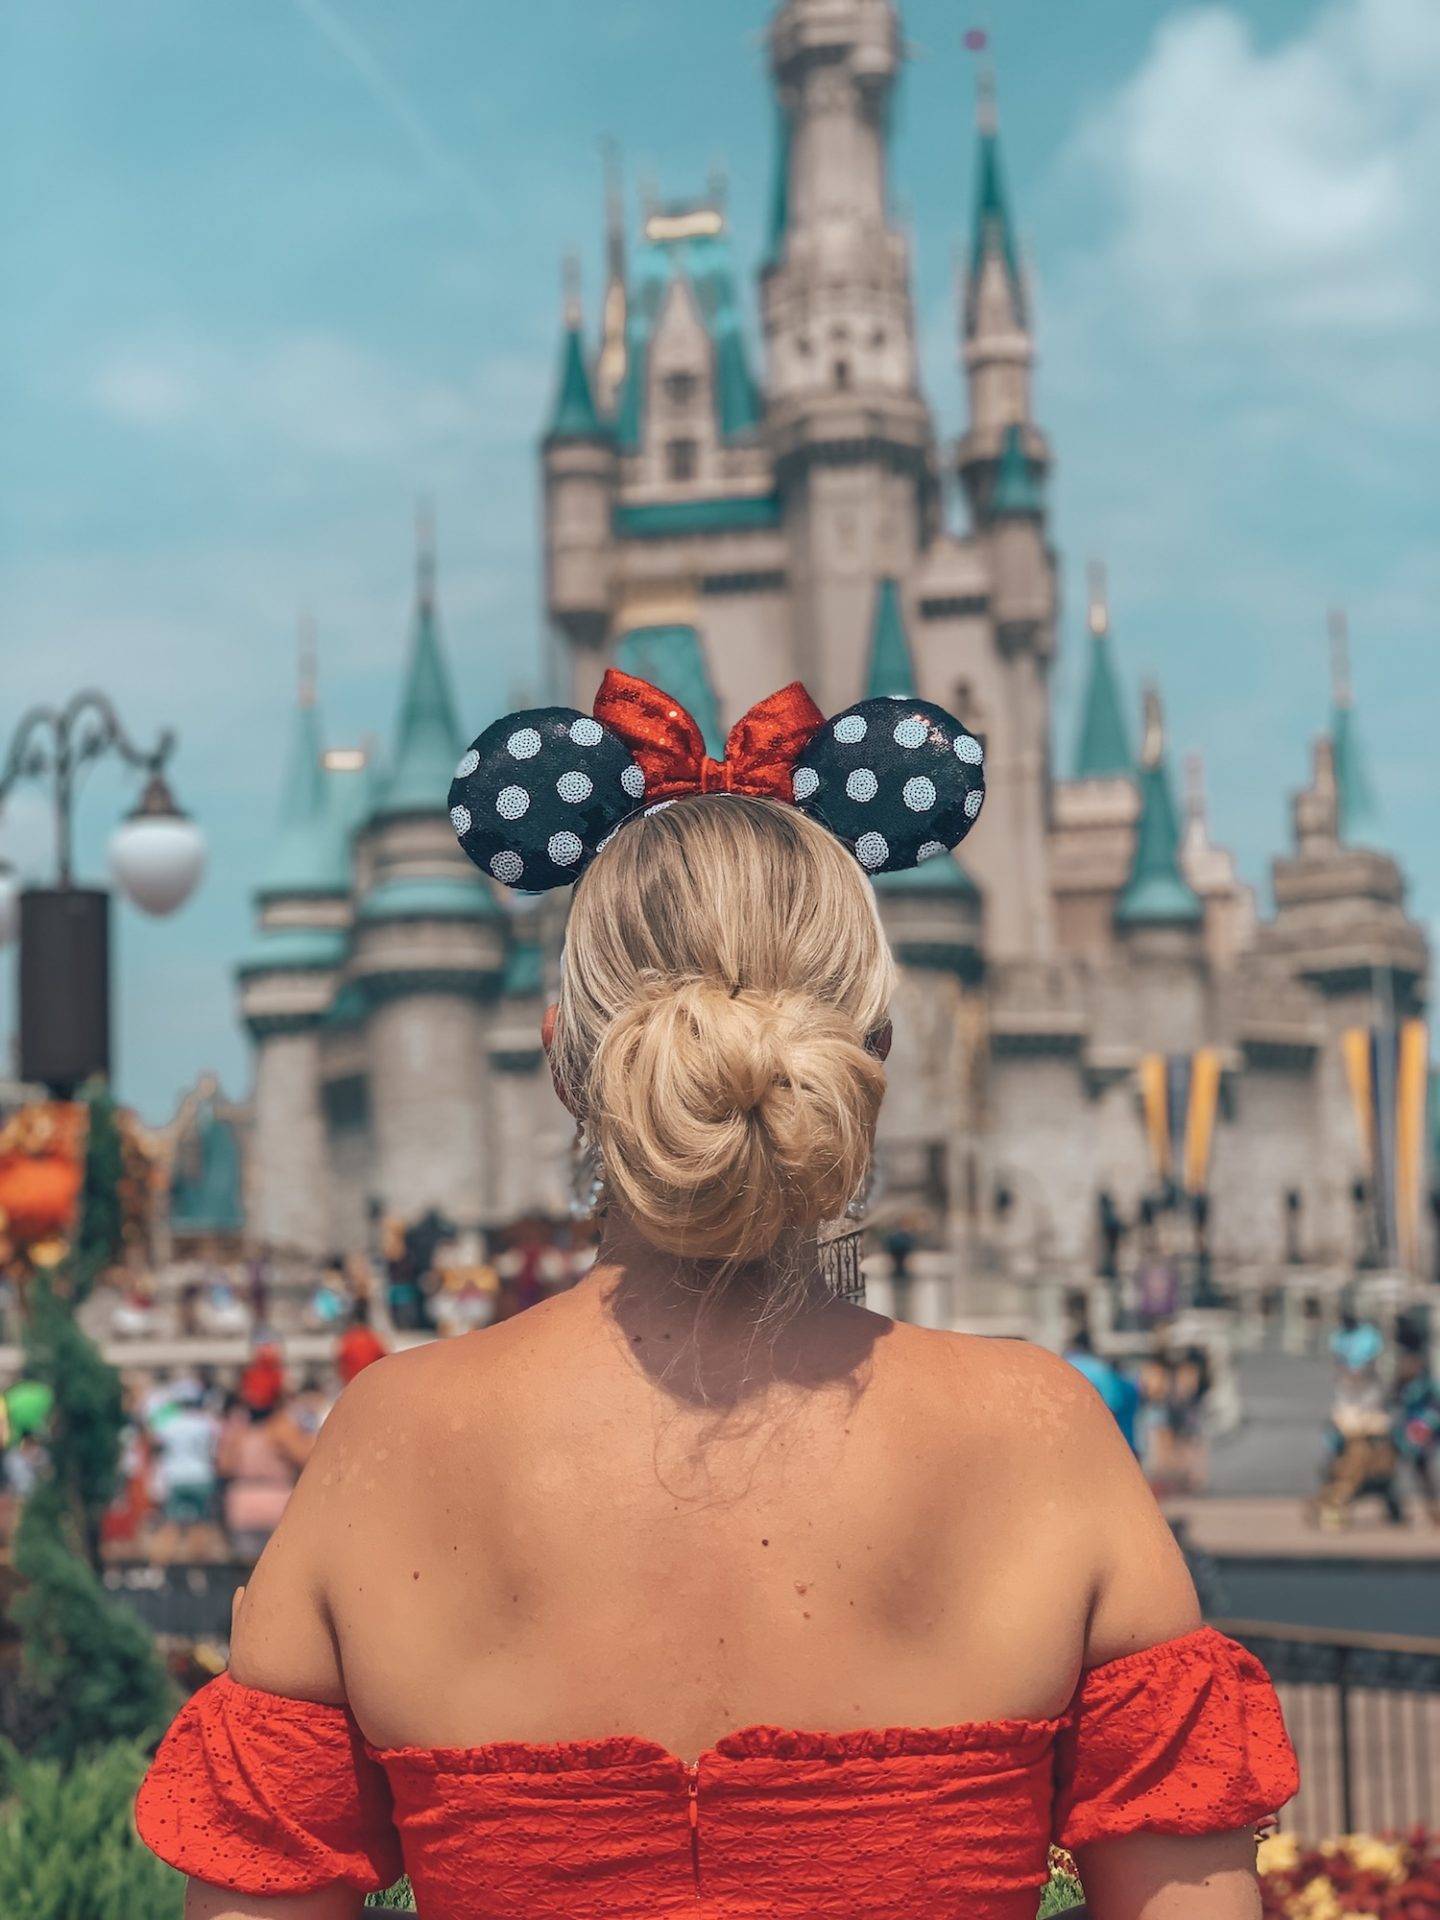 Click the photo for a complete guide on how to get the perfect photo at Disney! Includes a list of all the top Disney World photo spots. via www.kirstenwendlandt.com